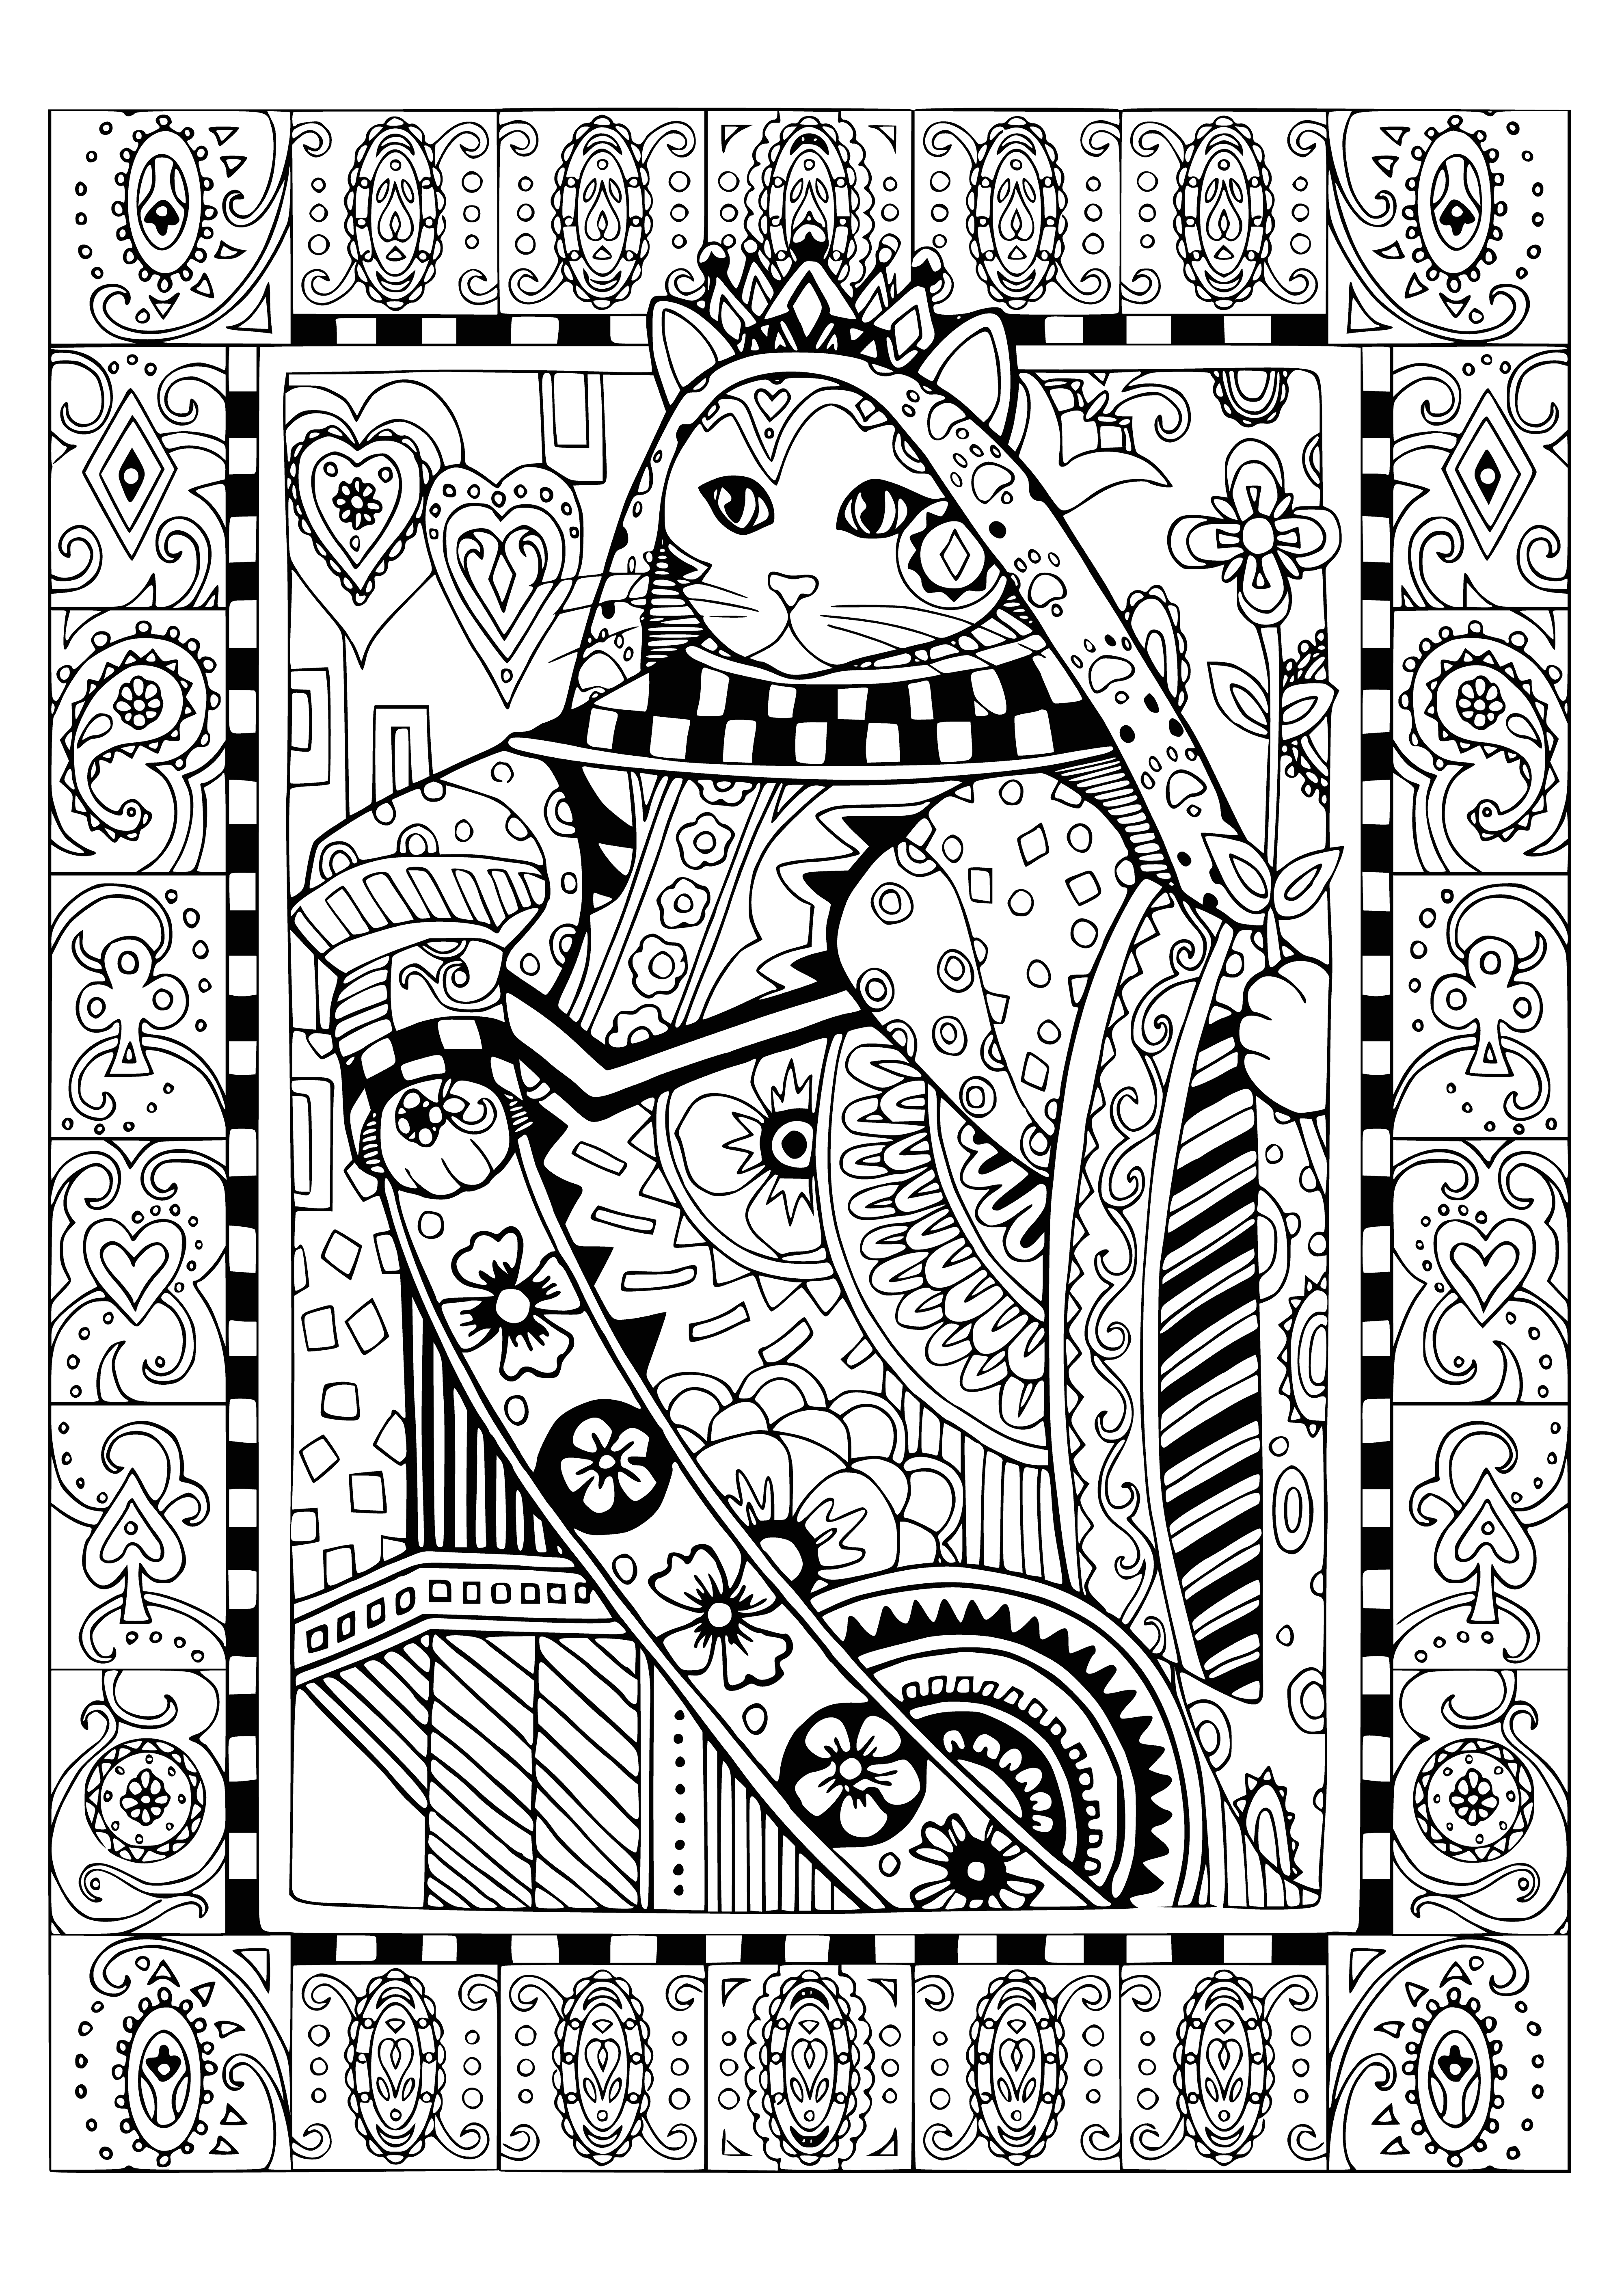 coloring page: Q. Cleo, a regal tabby, commands her domain - demanding the best pampering & relaxing atop a bookshelf surveying her kingdom.